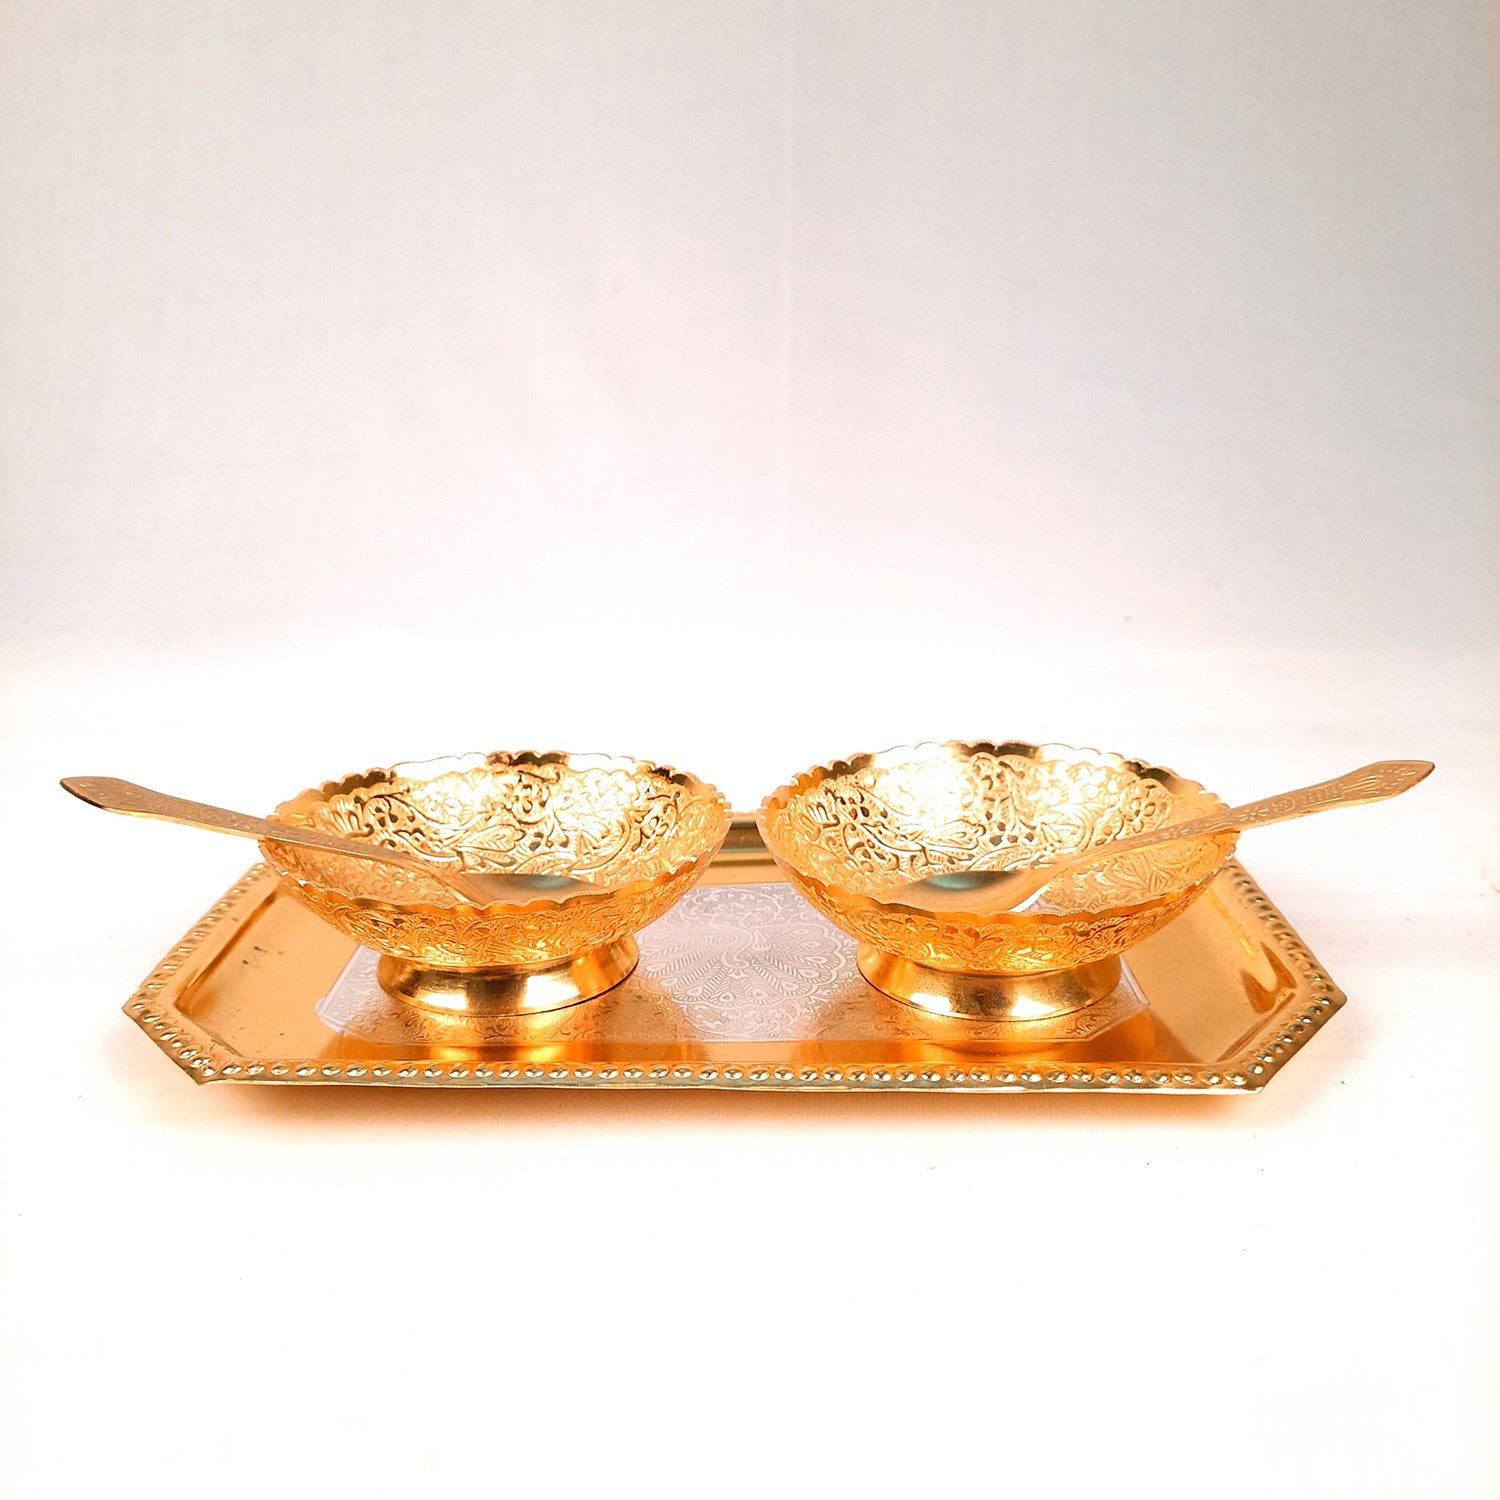 Dessert Bowls with Tray, Spoons & Gift Box | Dry Fruit/Mukhwas Serving Tray with Bowl - for Dining Table, Home & Kitchen Decor | Wedding, Housewarming & Diwal Gift Set - Apkamart